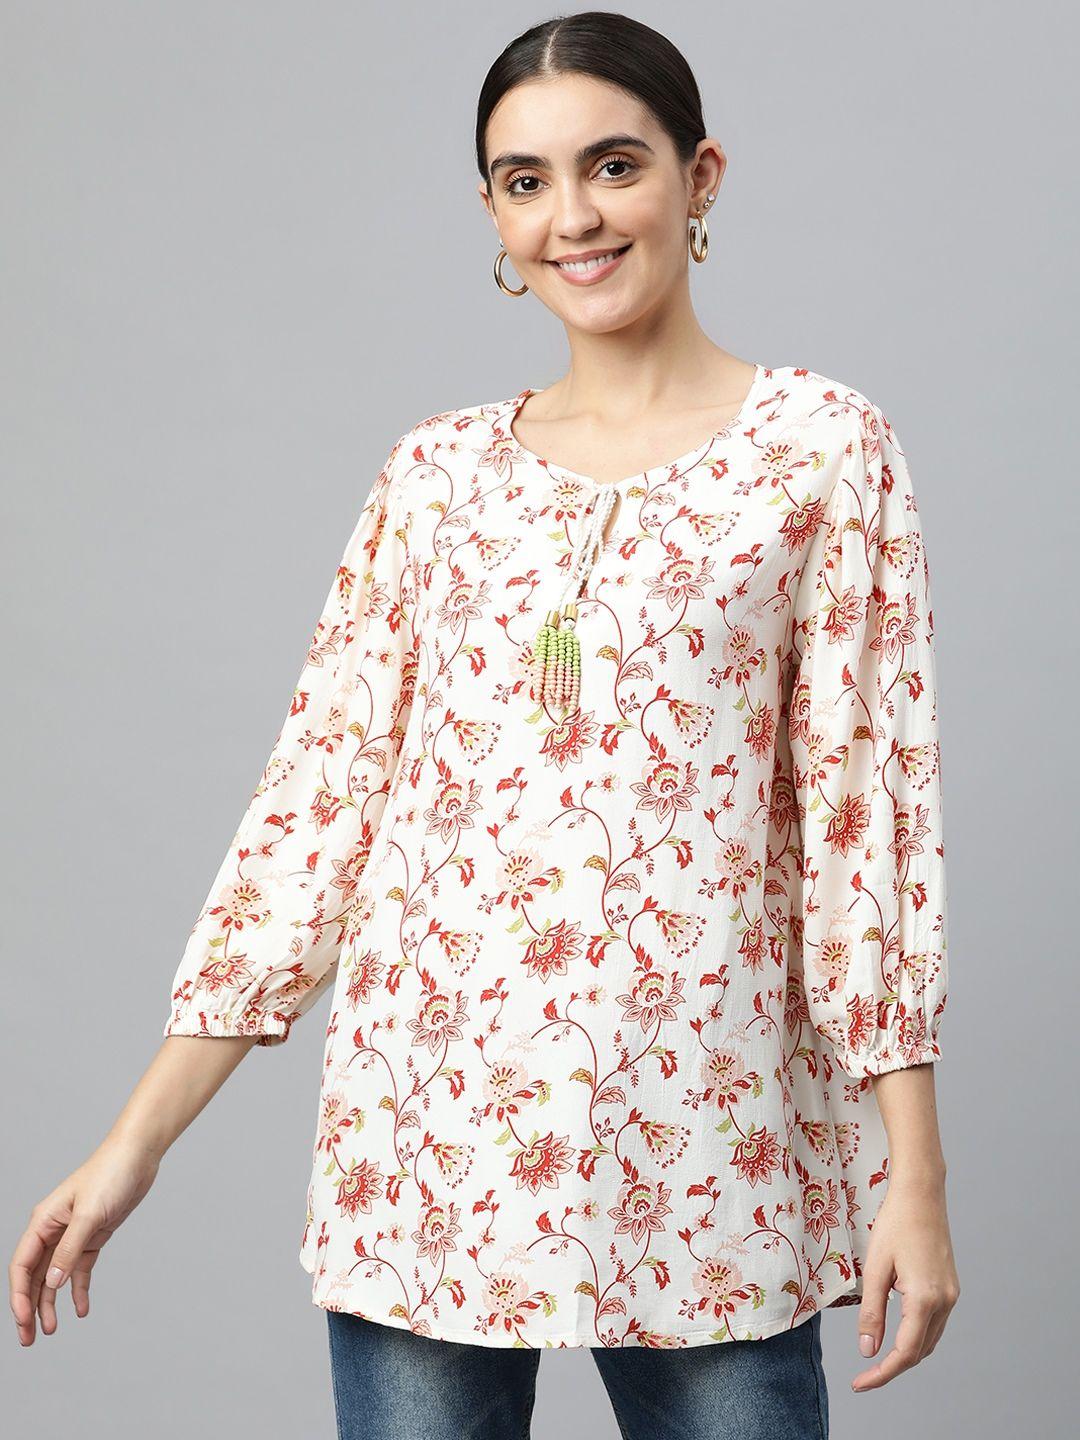 marks & spencer white & coral print tie-up neck top